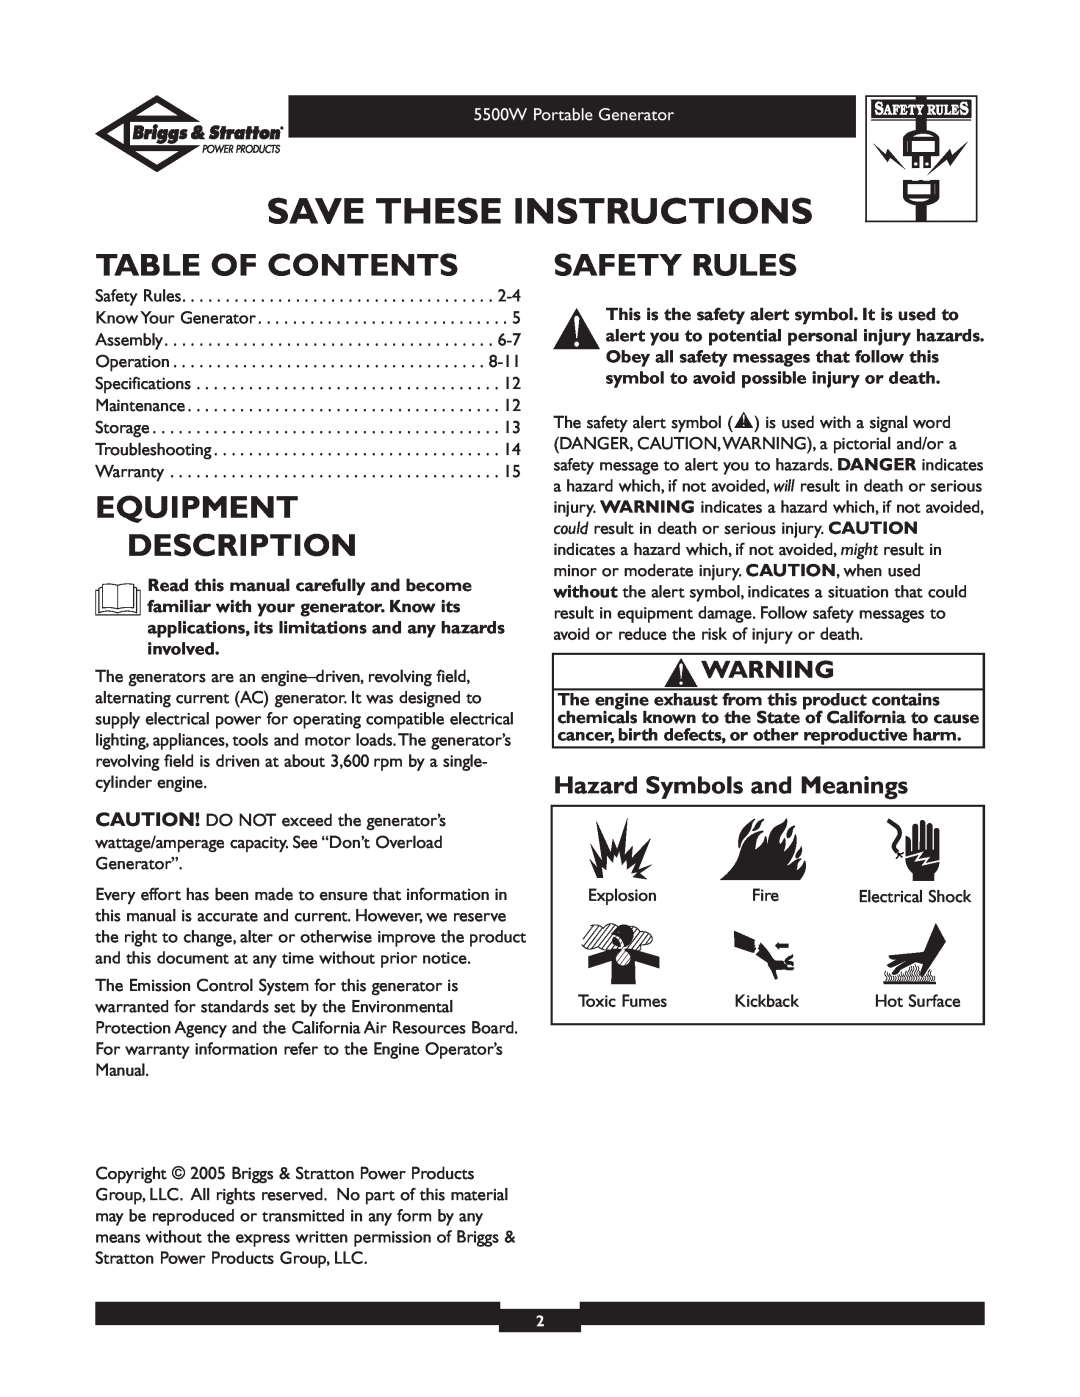 Briggs & Stratton 030209-1 Table Of Contents, Equipment Description, Safety Rules, Hazard Symbols and Meanings 